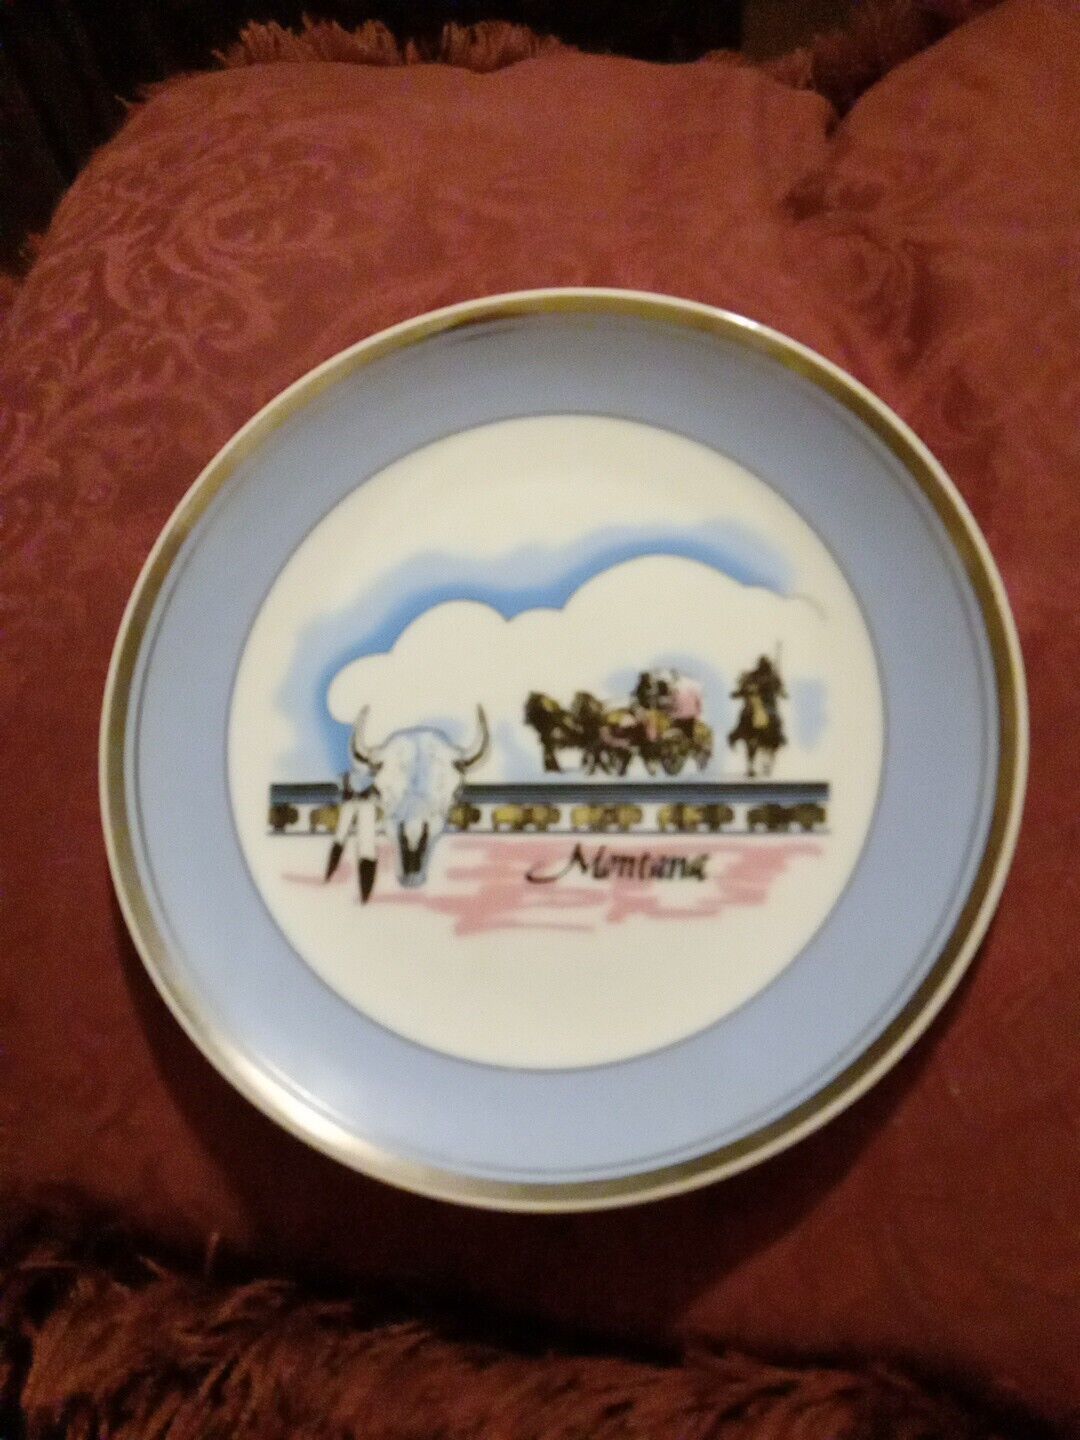 Vintage Western Montana Decorative Souvenir Plate 6 in by 6 in